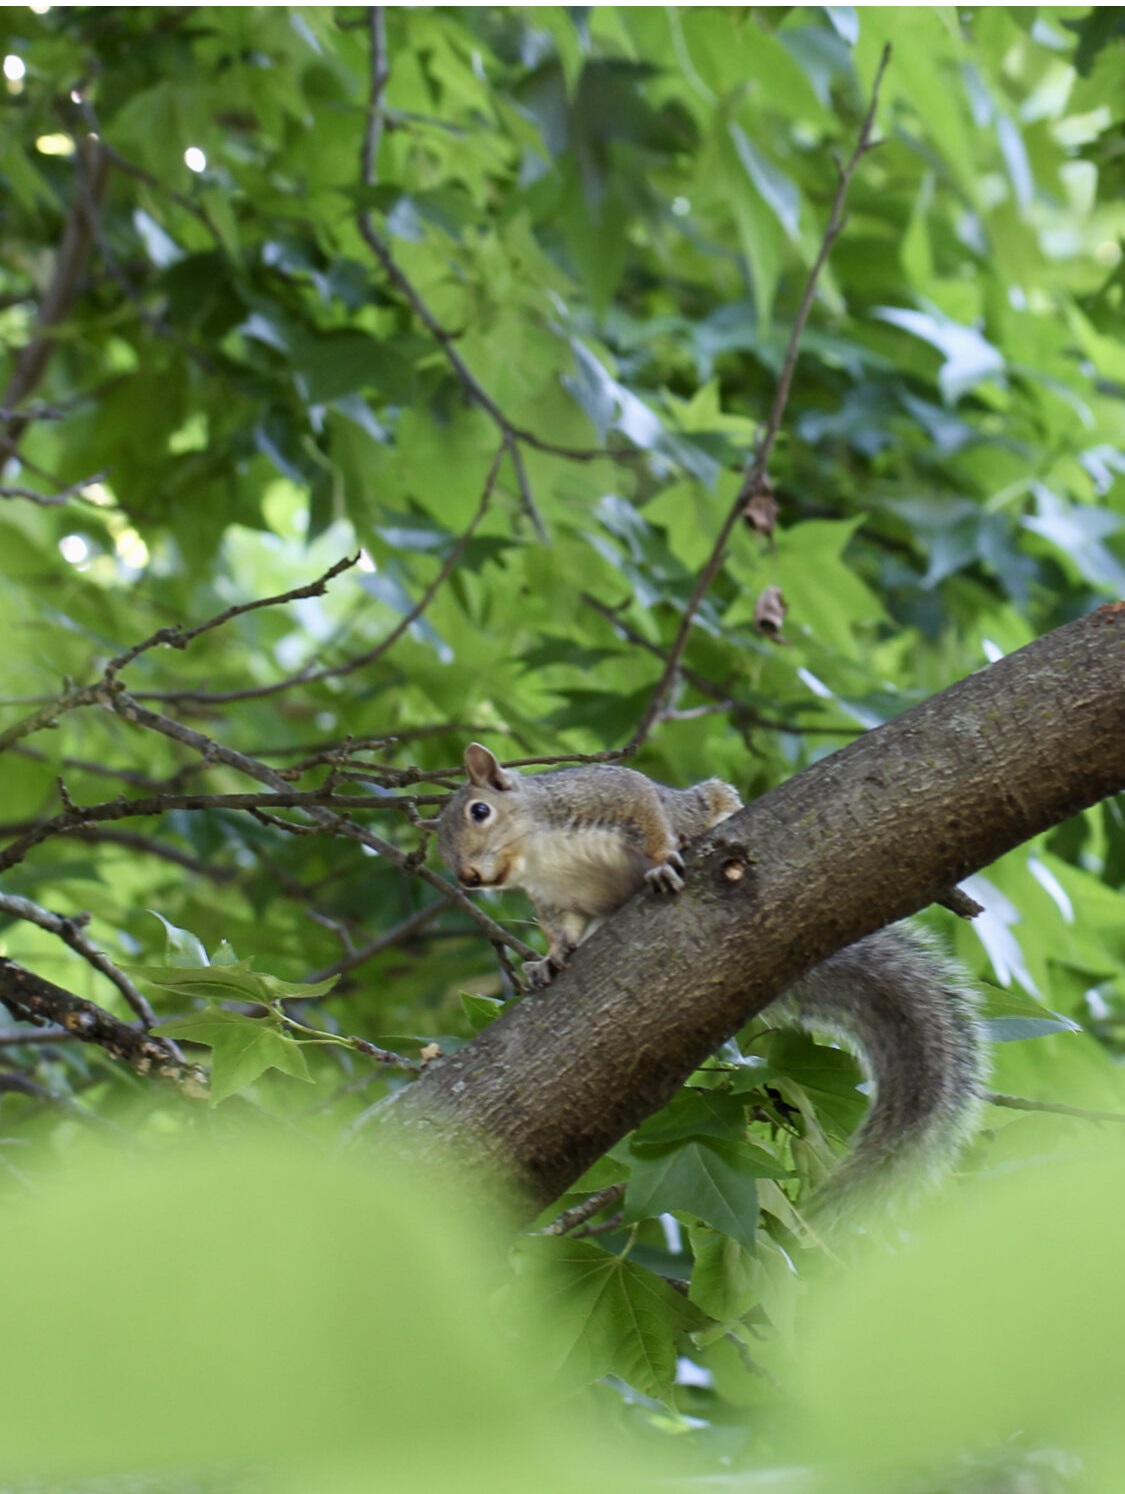 Grey squirrel sitting on a tree branch with leaves in the background